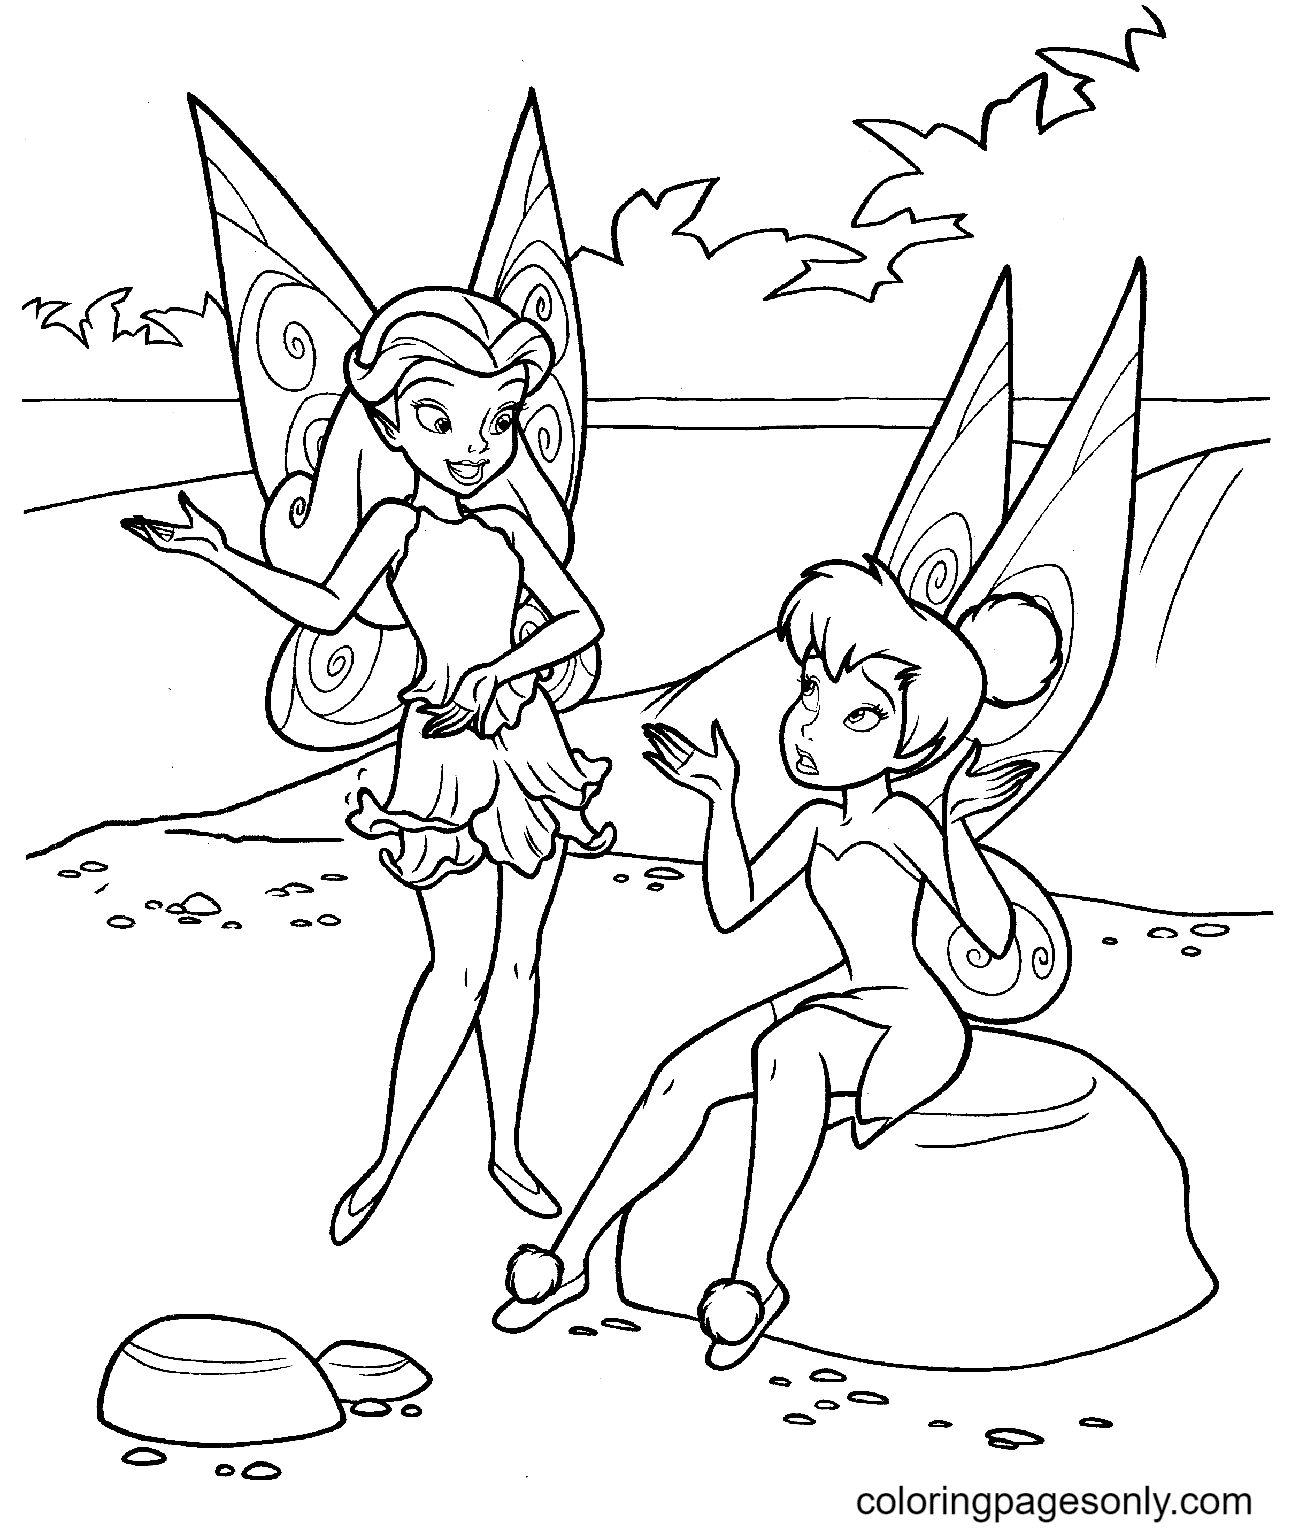 Tinkerbell And Rosetta Coloring Pages   Tinkerbell Coloring Pages ...